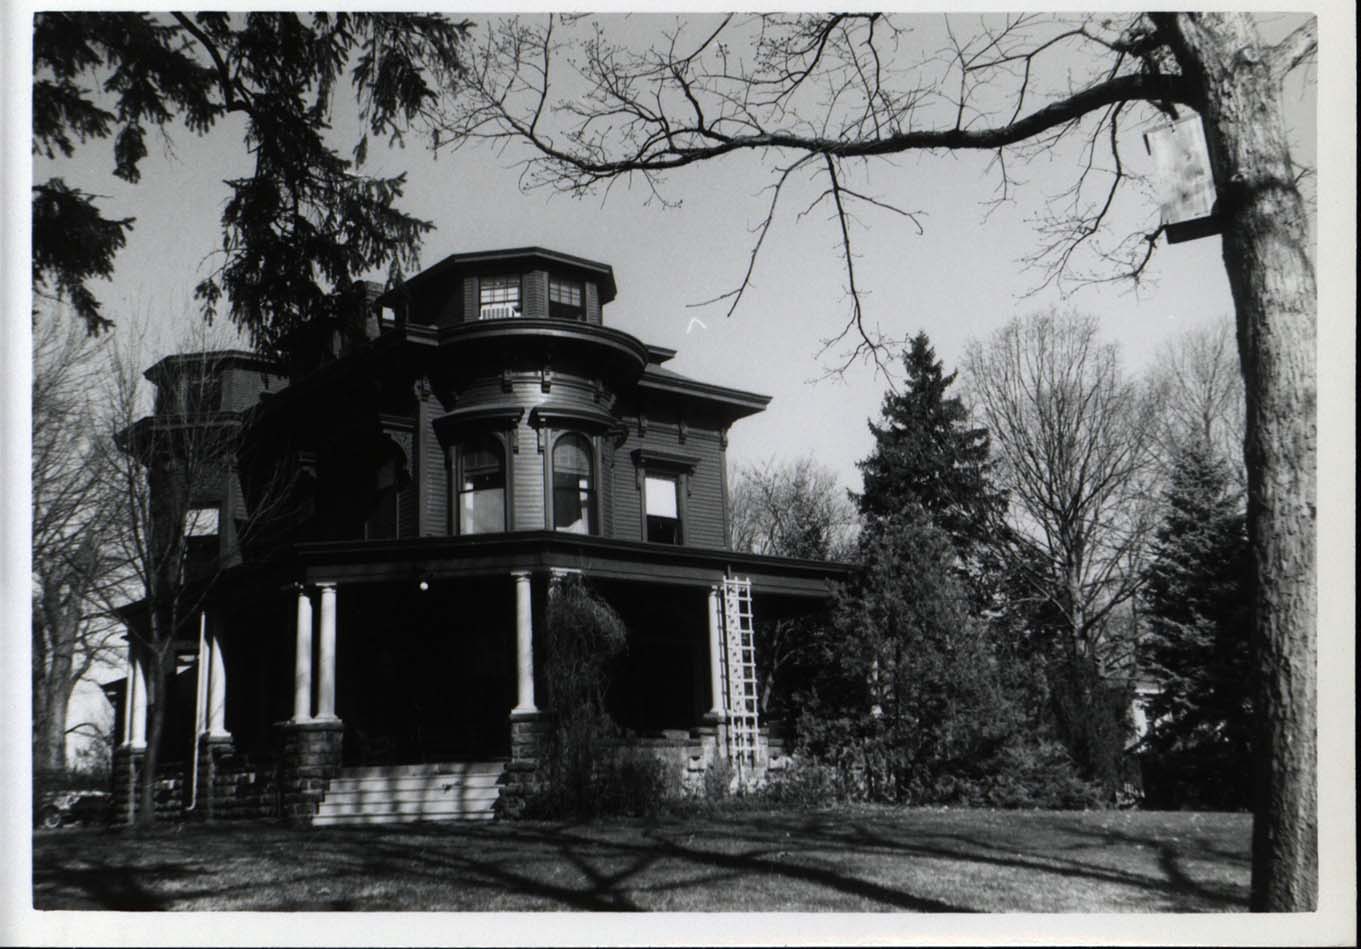 Photograph of Frederic Leopold's house with a Wood Duck house in a tree